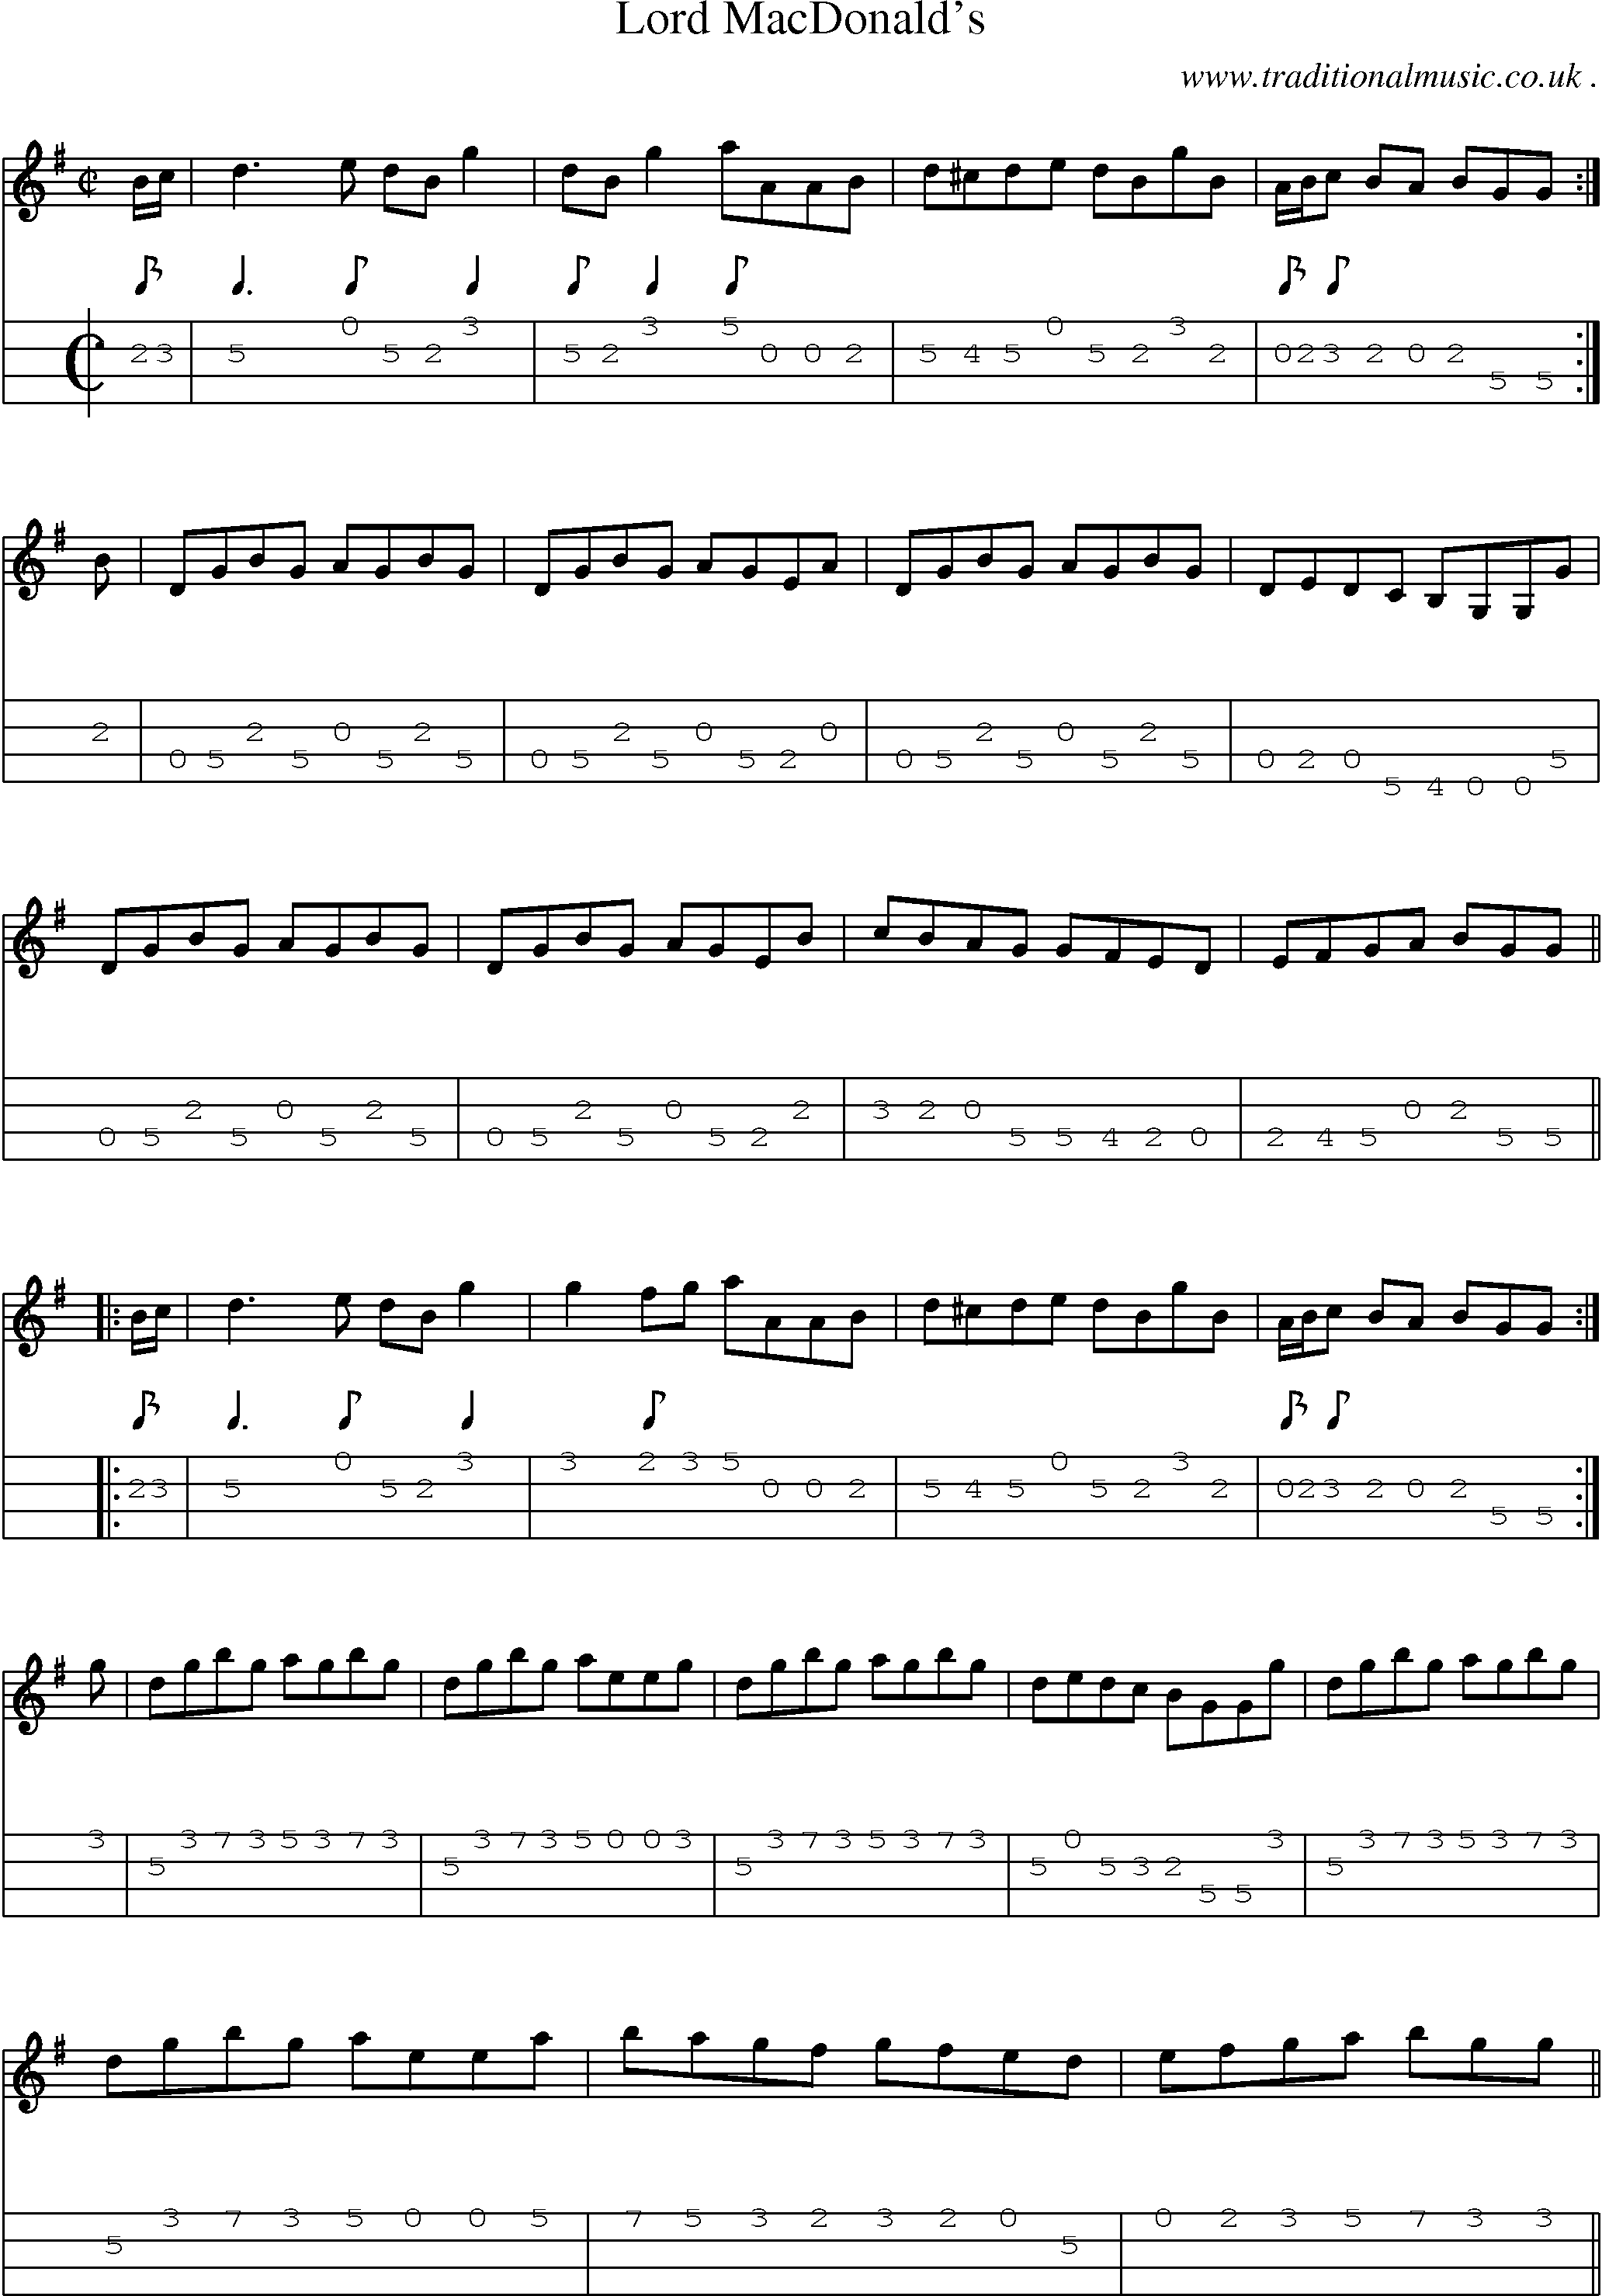 Sheet-music  score, Chords and Mandolin Tabs for Lord Macdonalds